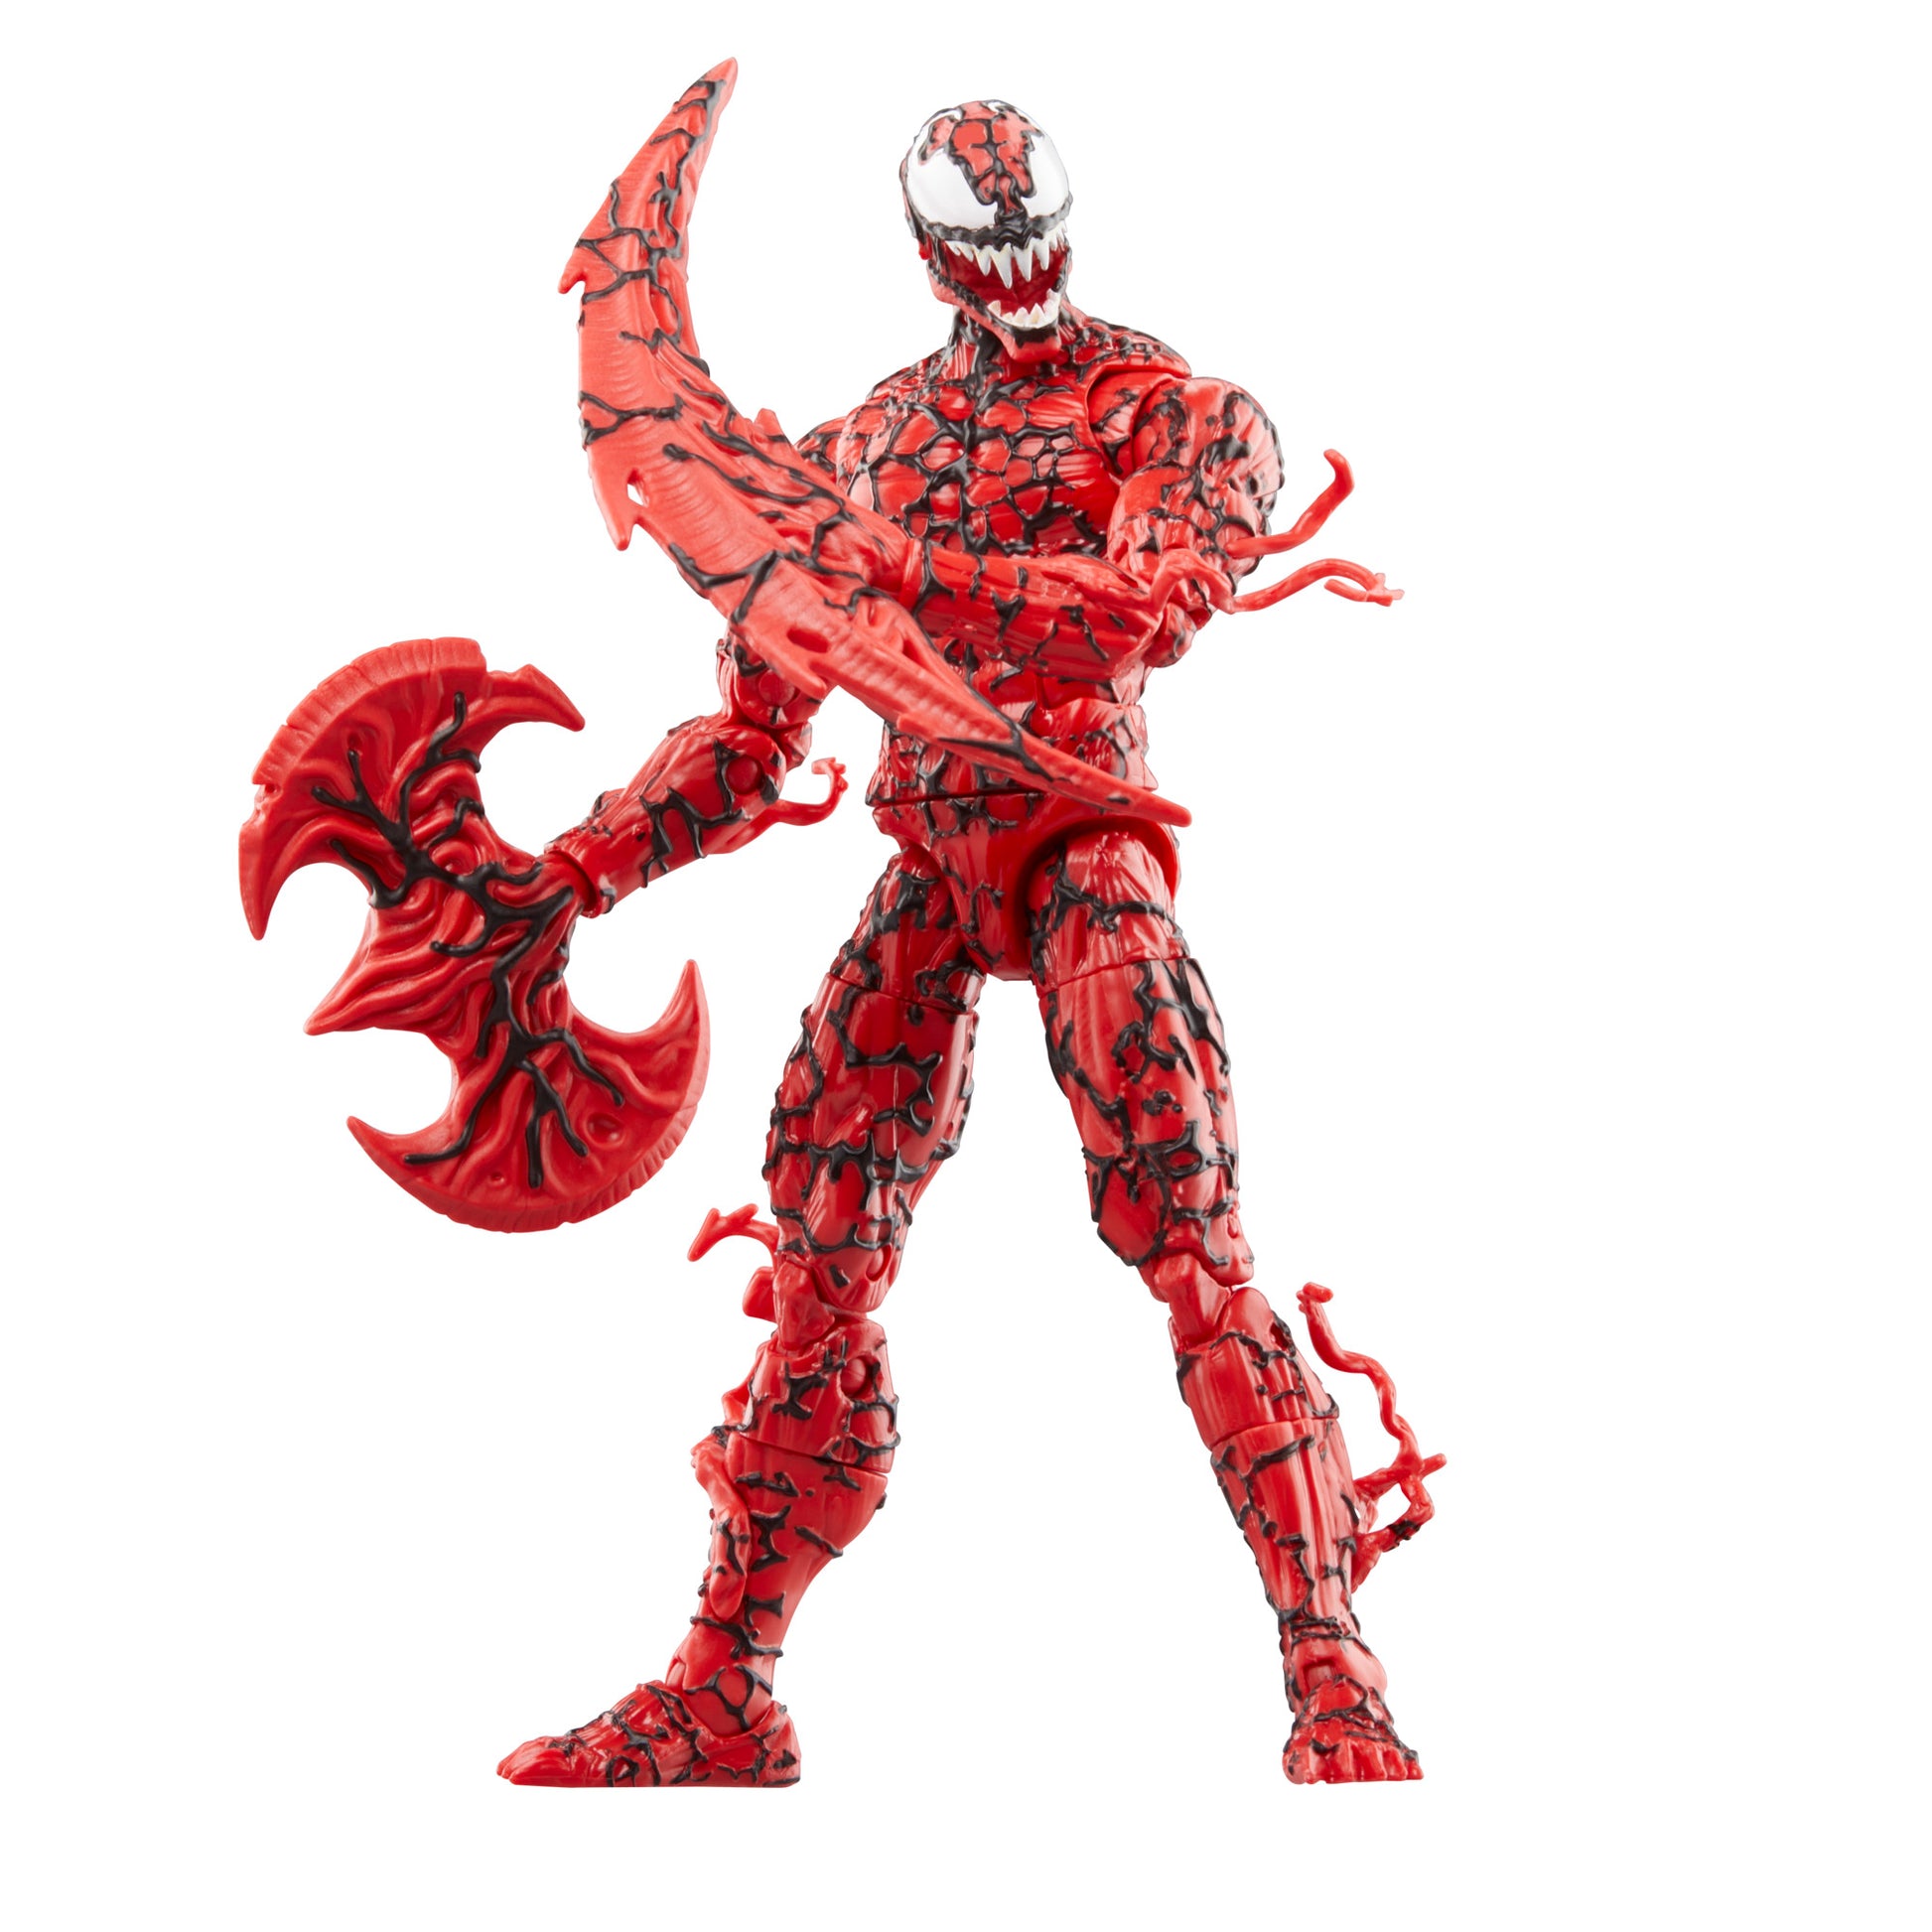 Marvel Legends Series Carnage, Marvel Comics Collectible Action Figure